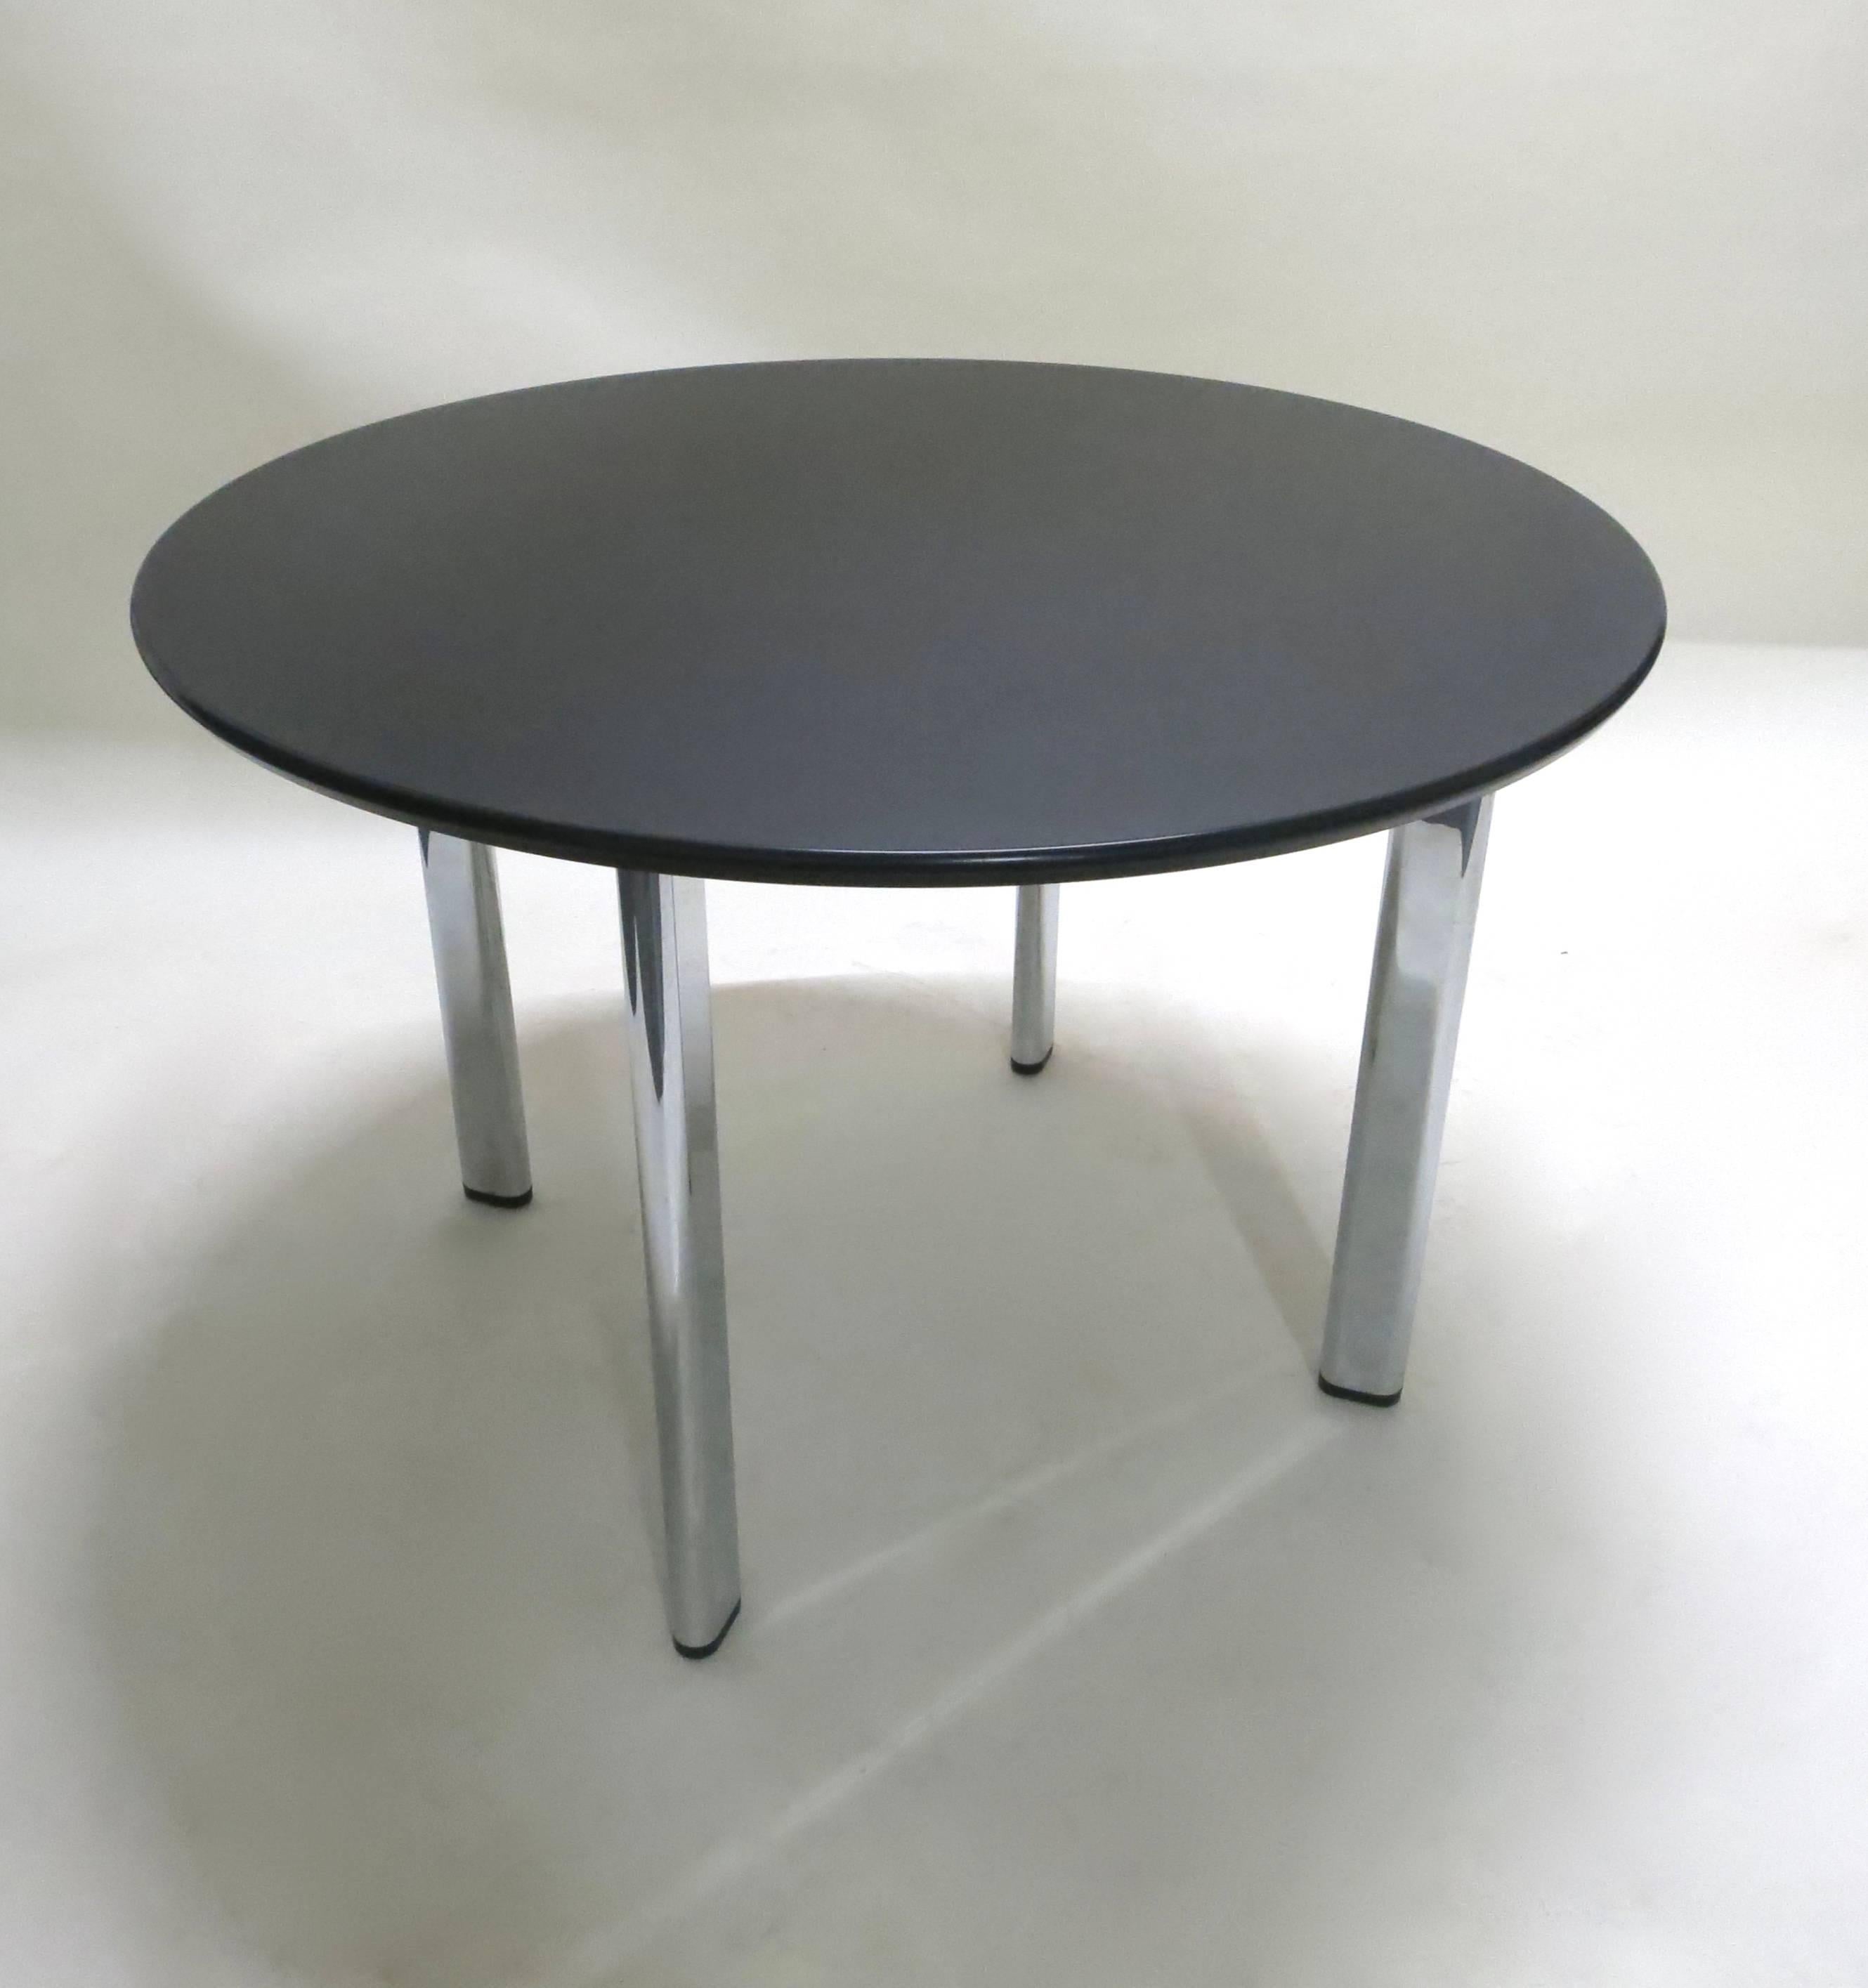 Dining or work table with four chromed legs and a round, black laminate and vinyl bullnose edge top, all in excellent condition.